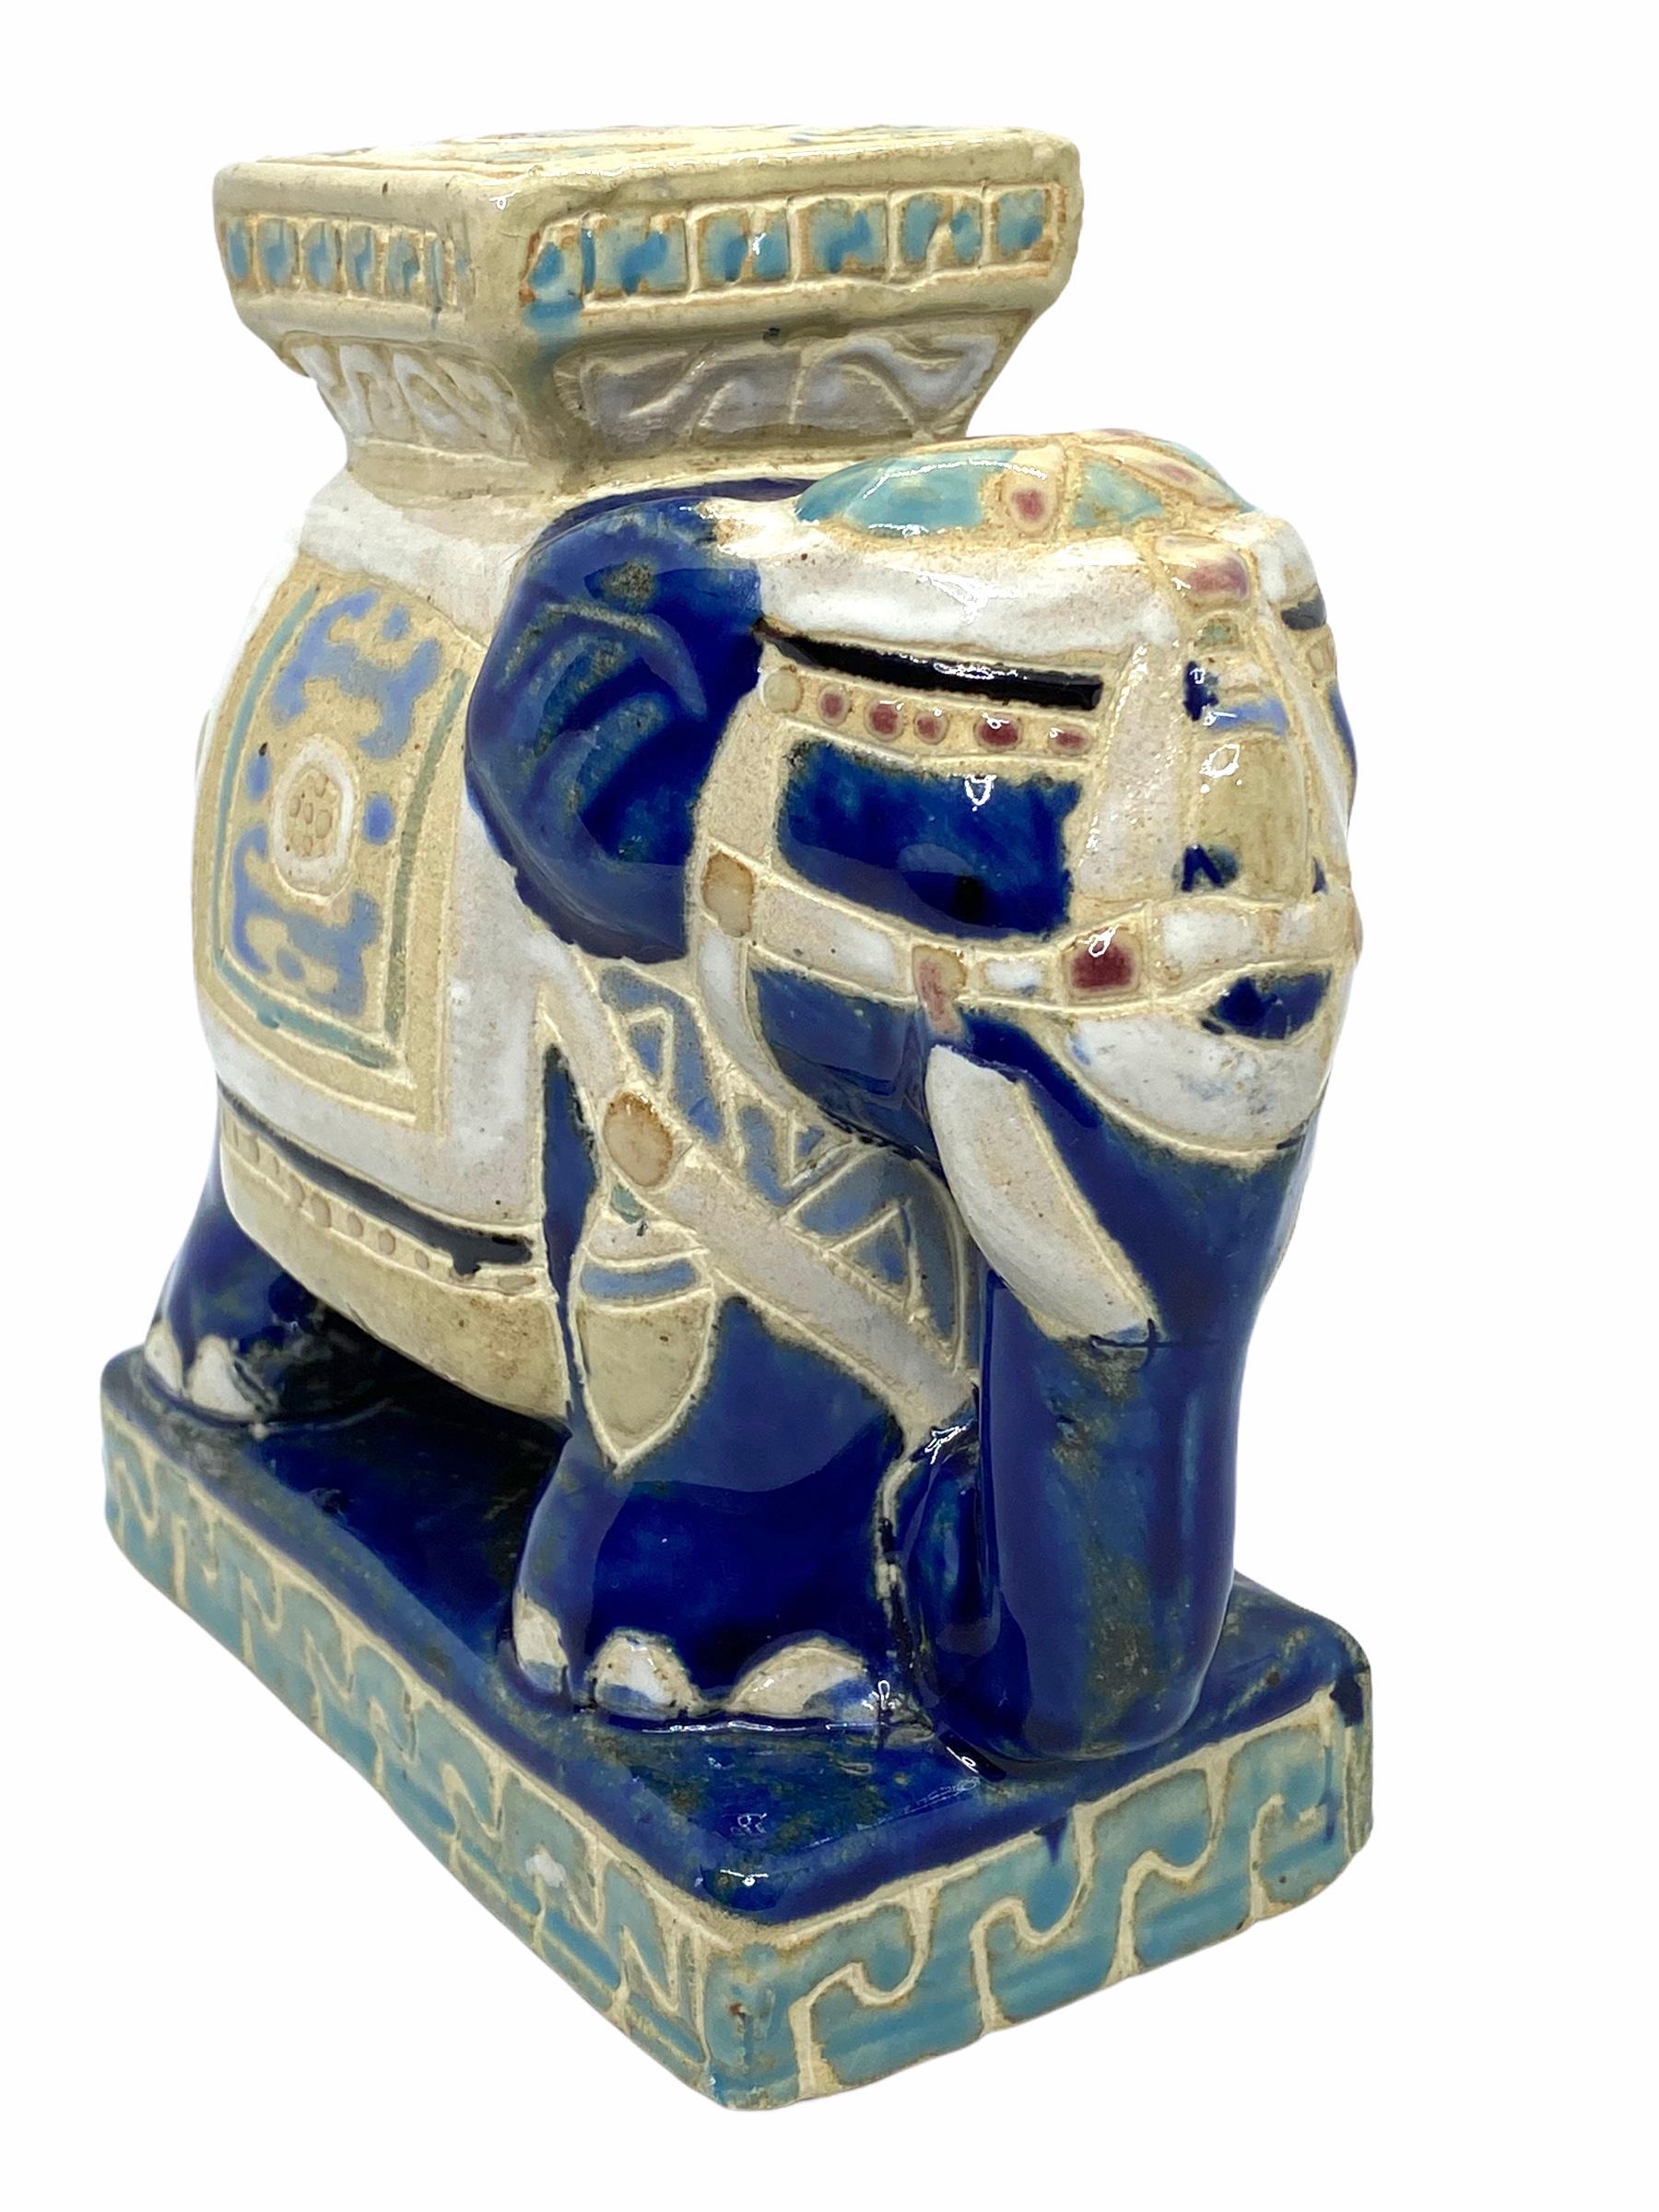 German Petite Vintage Hollywood Regency Chinese Blue Elephant Stool Plant Stand or Seat For Sale